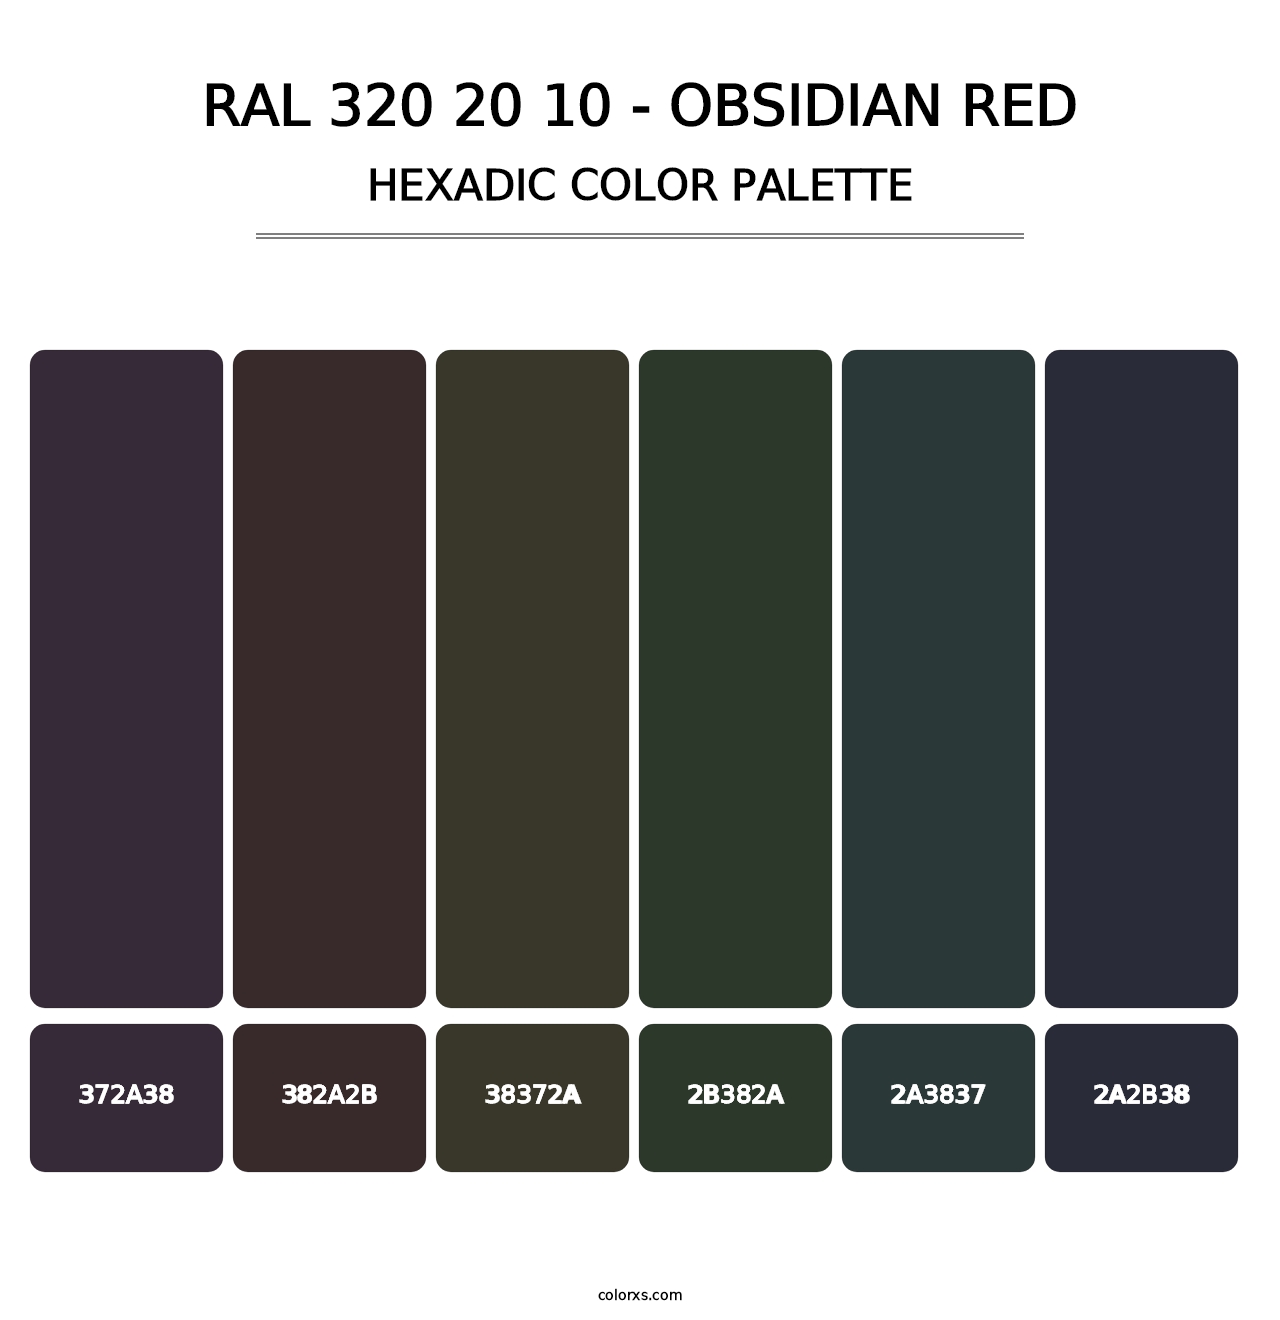 RAL 320 20 10 - Obsidian Red - Hexadic Color Palette